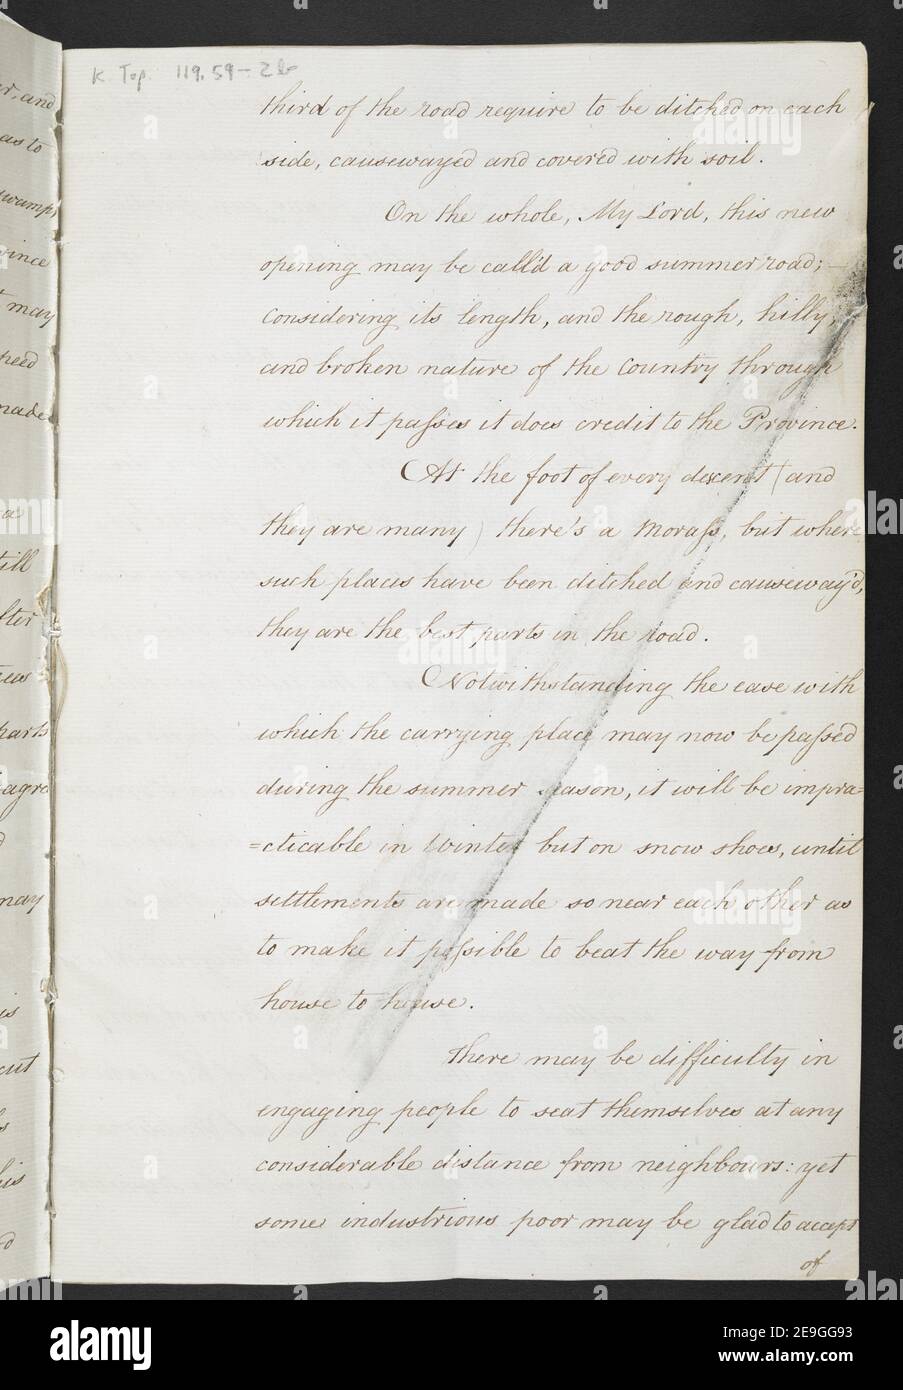 Copy of a Report made by the Deputy Postmaster General for the Province of Quebec, to the Right Honourable Lord Dorchester Governor General of the Province of Quebec, Nova Scotia and New Brunswick.  Author  Finlay, Hugh 119.59.2.a. Place of publication: Quebec Publisher: Hugh Finlay, Date of publication: 30th August 1787.  Item type: 36 pages Medium: manuscript text in ink Dimensions: 32 x 21 cm  Former owner: George III, King of Great Britain, 1738-1820 Stock Photo